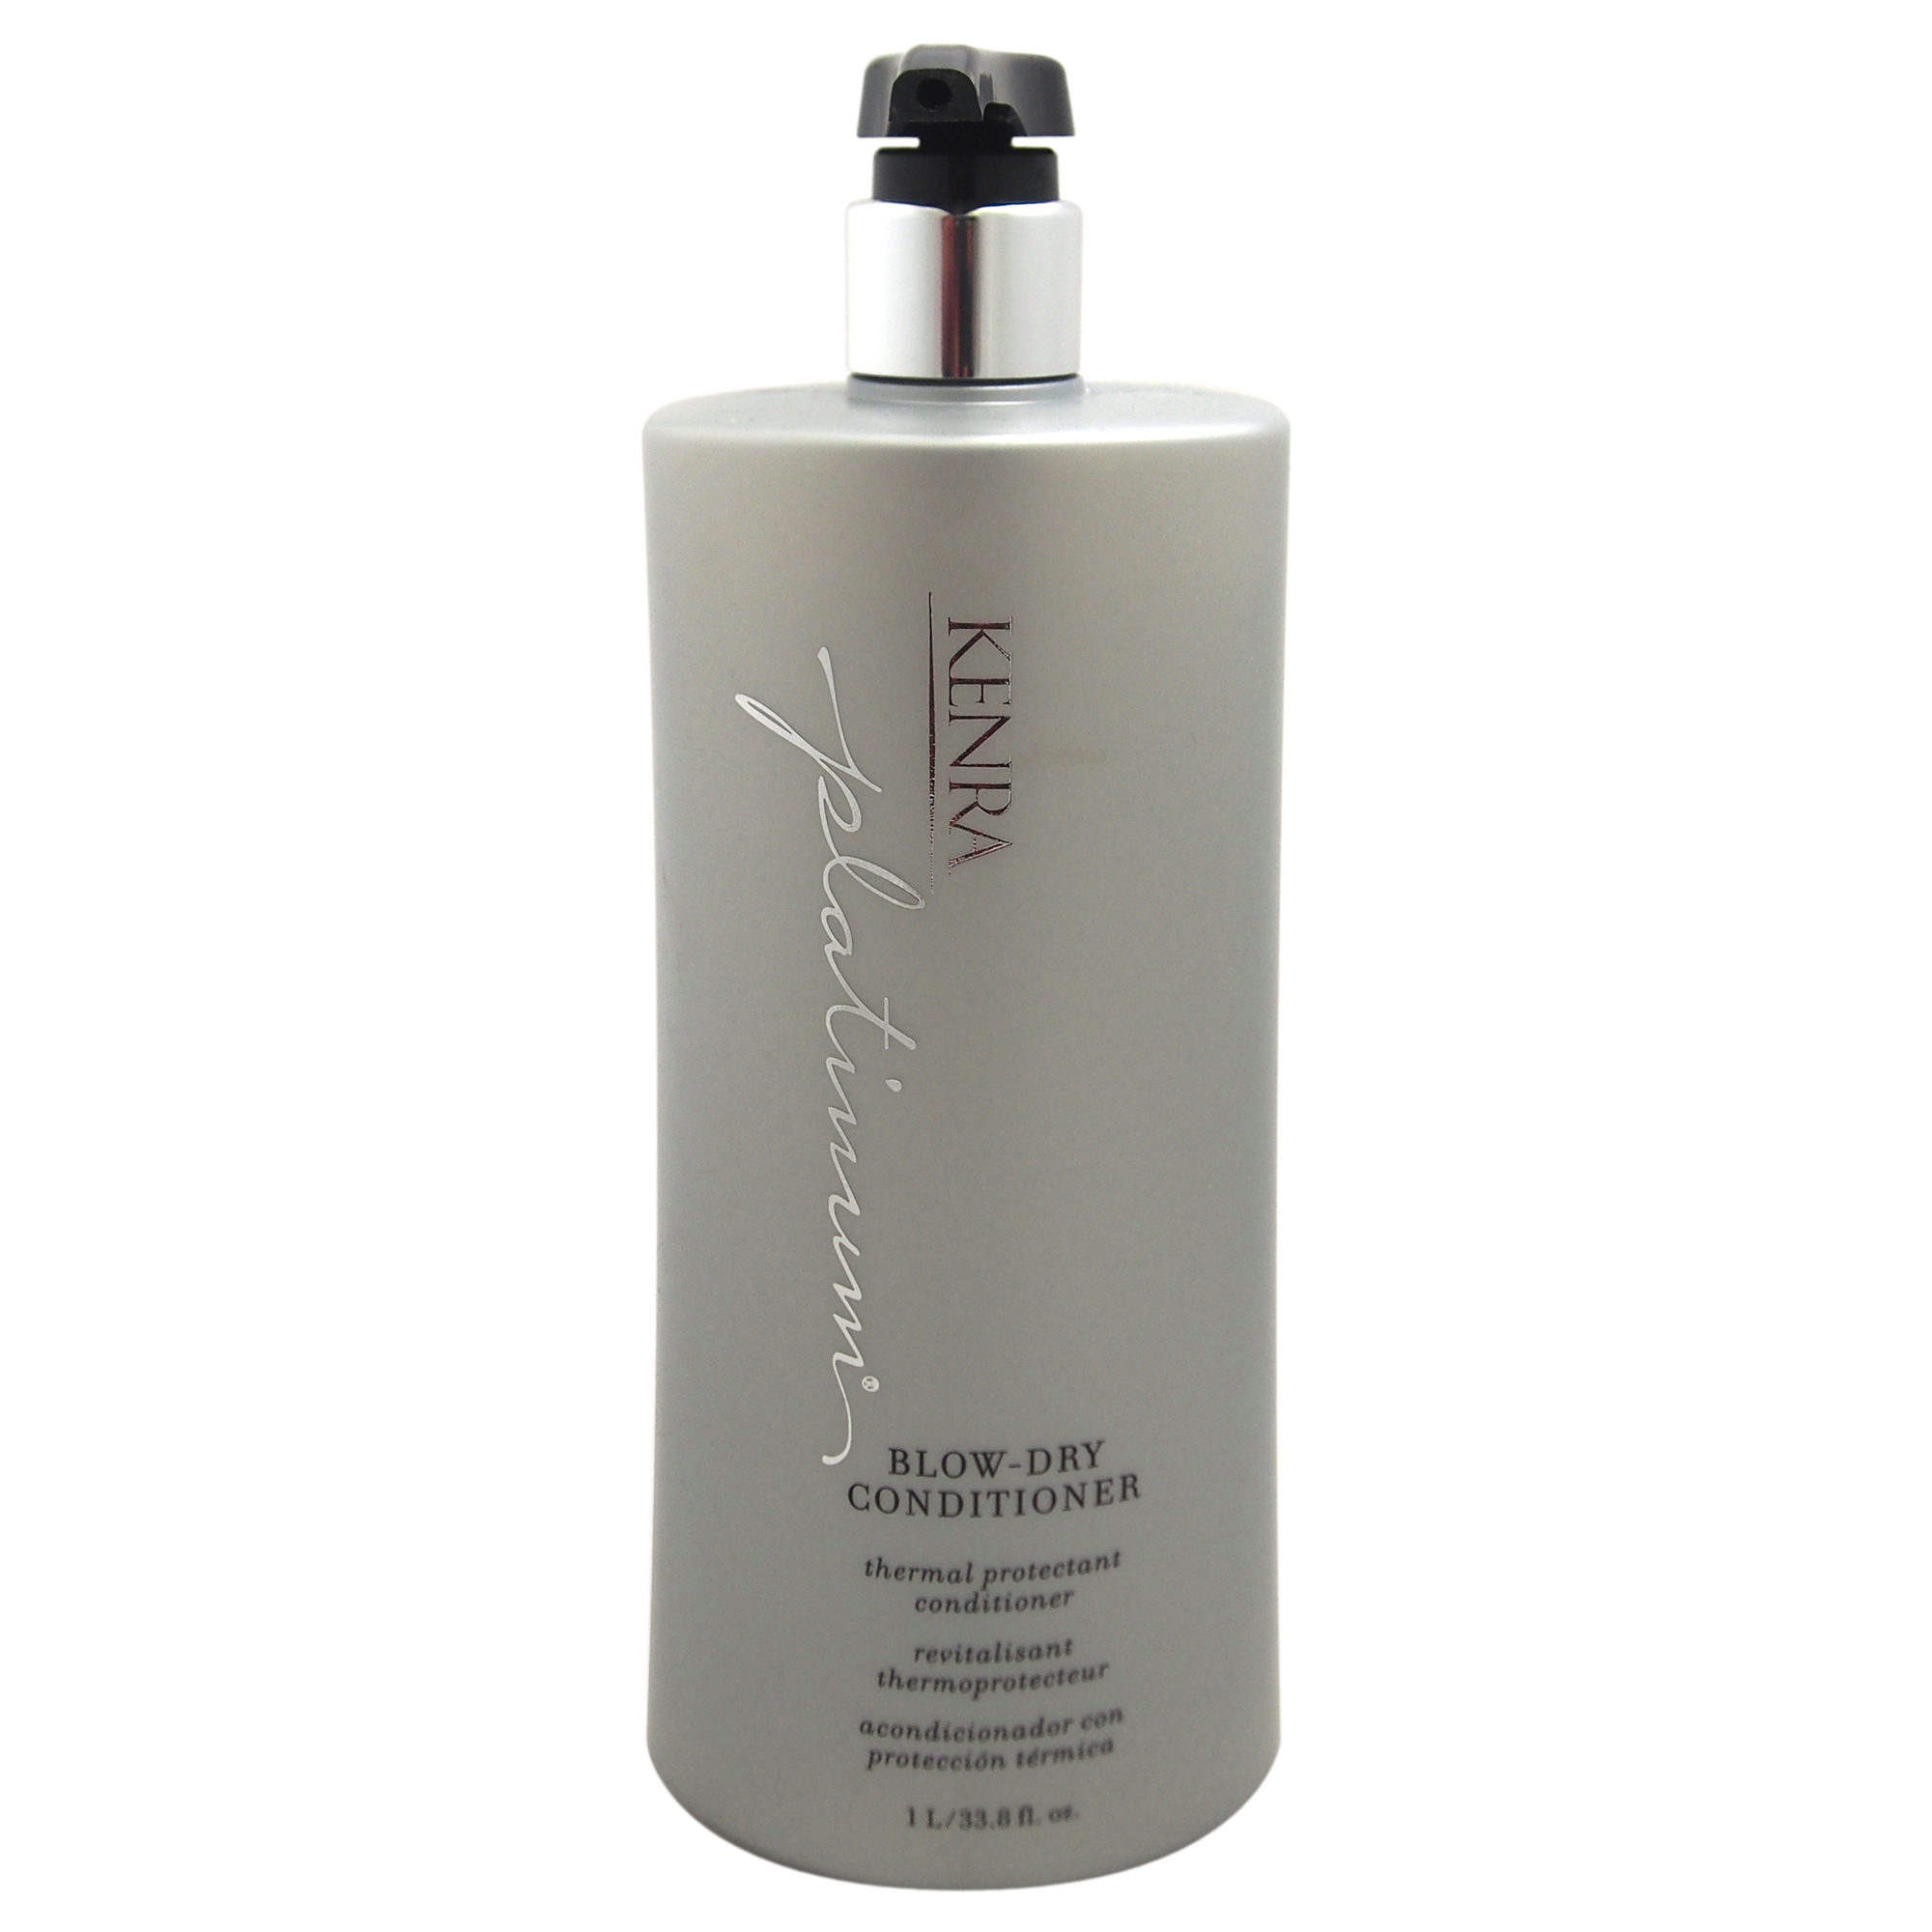 UPC 014926187332 product image for Platinum Blow-Dry Conditioner - Thermal Protectant Conditioner | upcitemdb.com